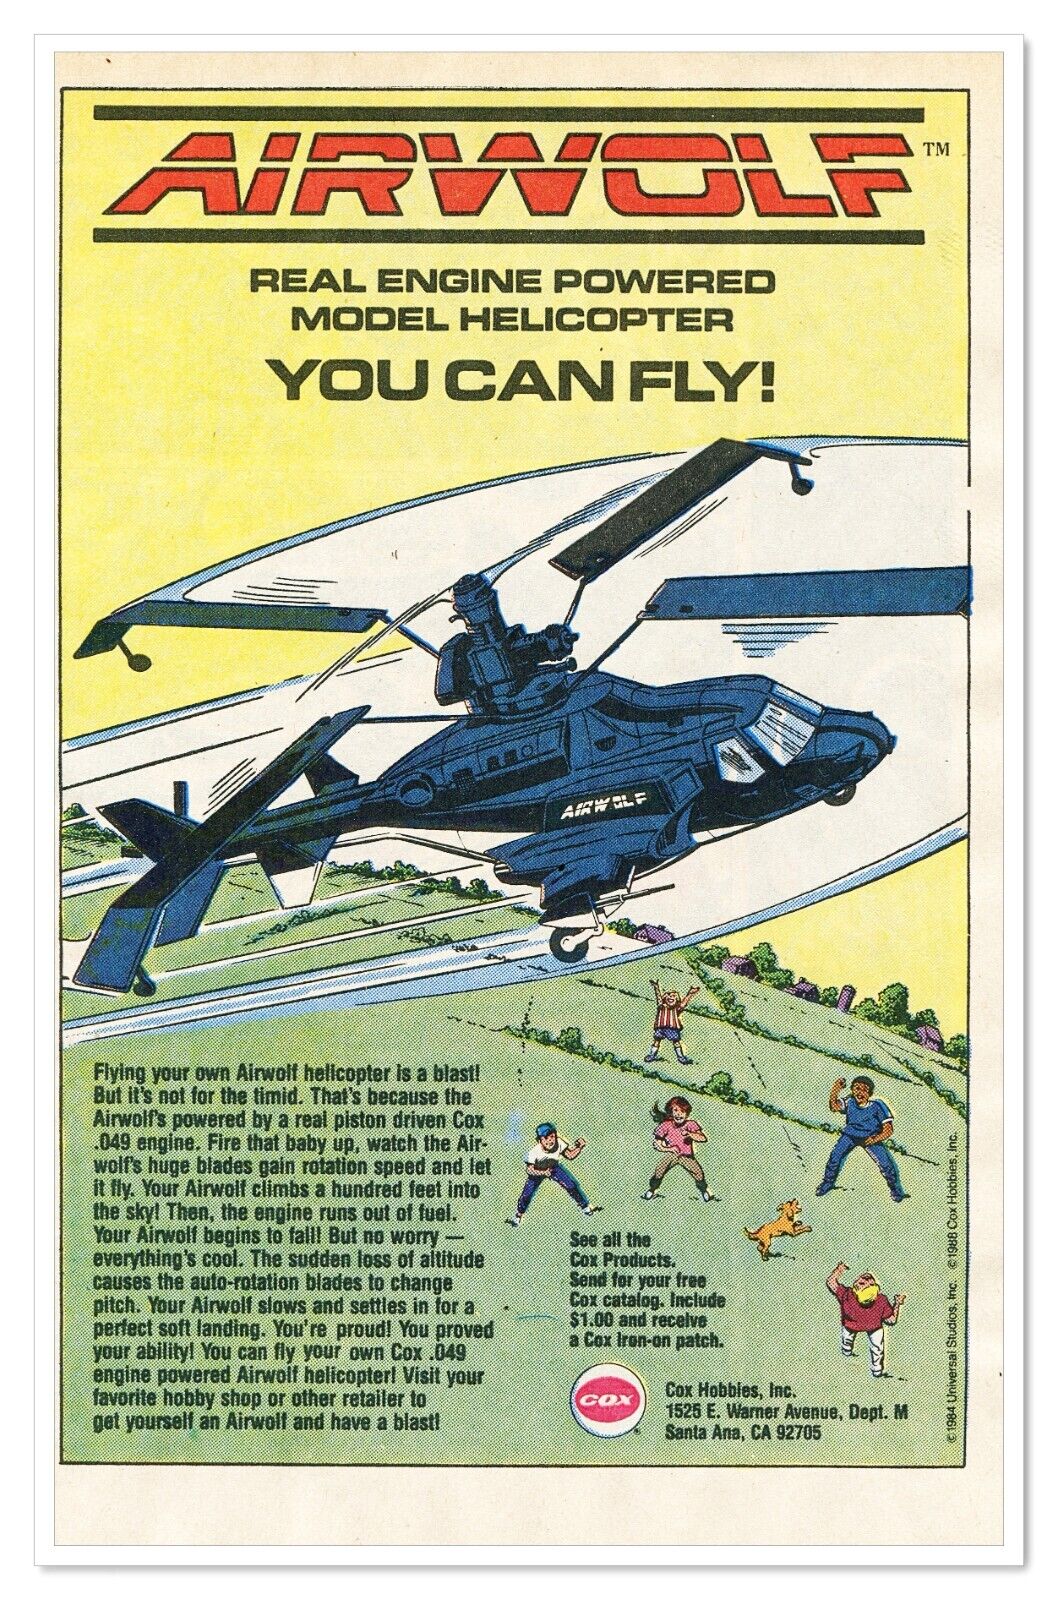 Cox Hobbies Airwolf Helicopter Vintage 1989 Full-Page Newsprint Magazine Ad